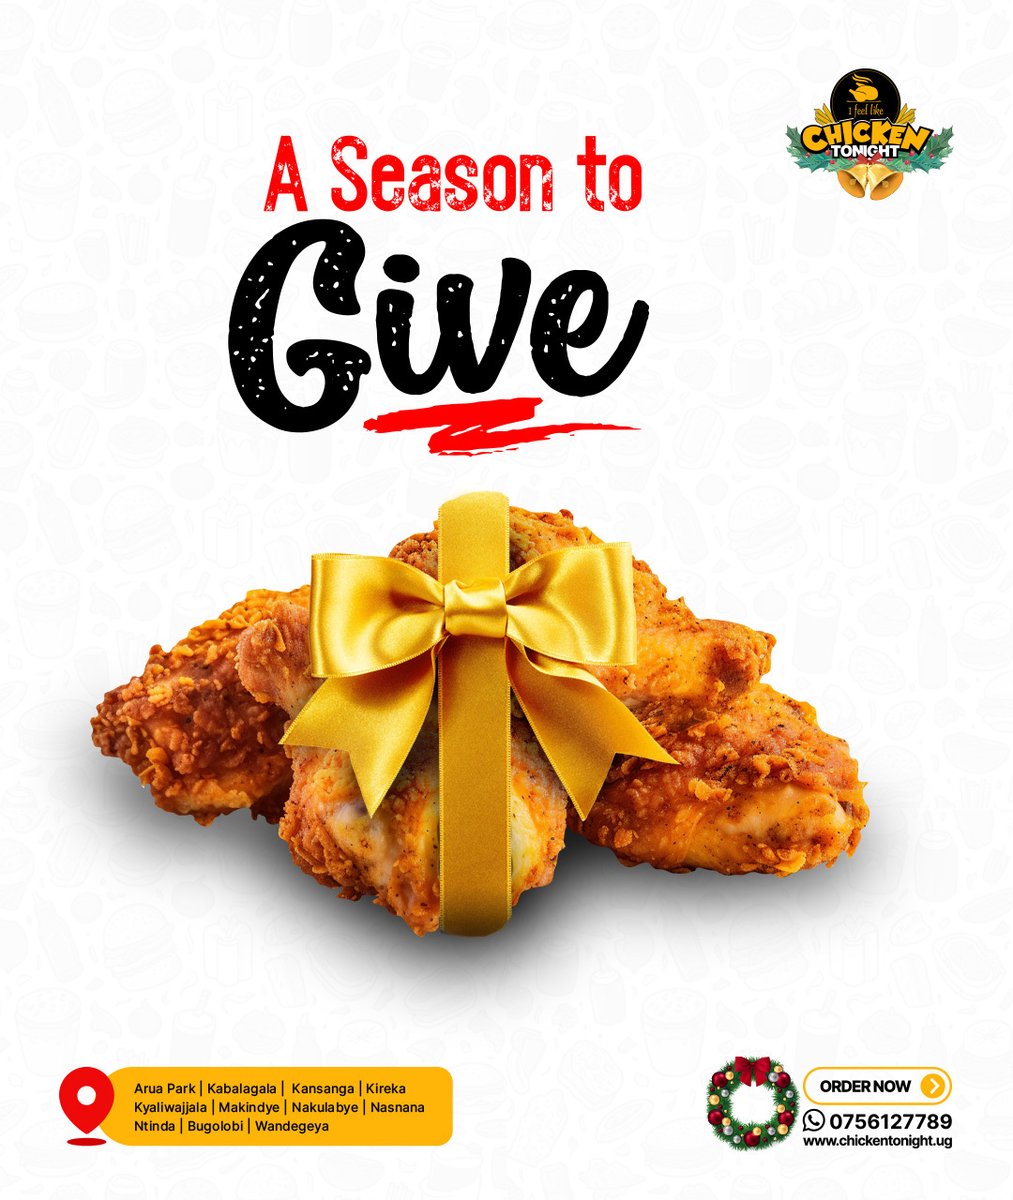 Tis the season to give. Gift a loved one a meal from us today.🥰

#CrispyAffair
#Crispyfiesta
#Crispyseason
#crispycombo
#givingseason
#CrispyChristmas